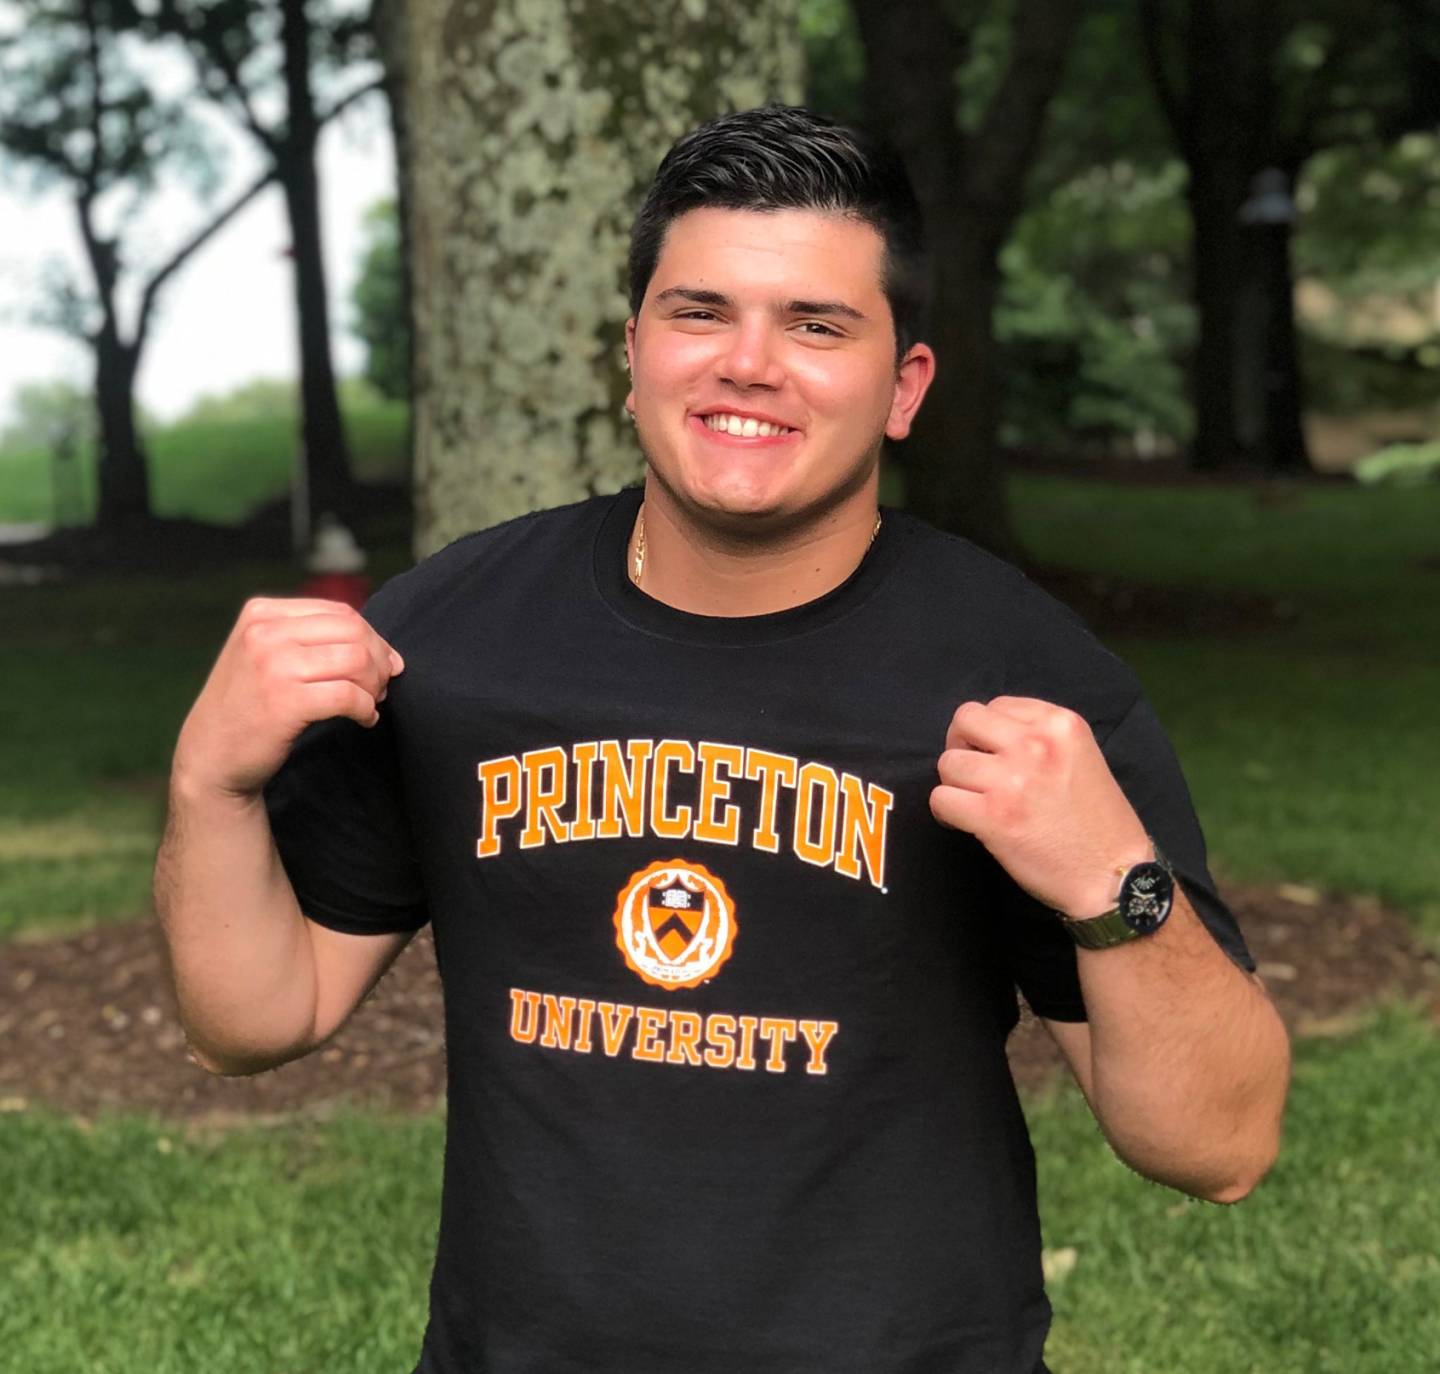 A young man wearing a t-shirt emblazoned with the words "Princeton University"